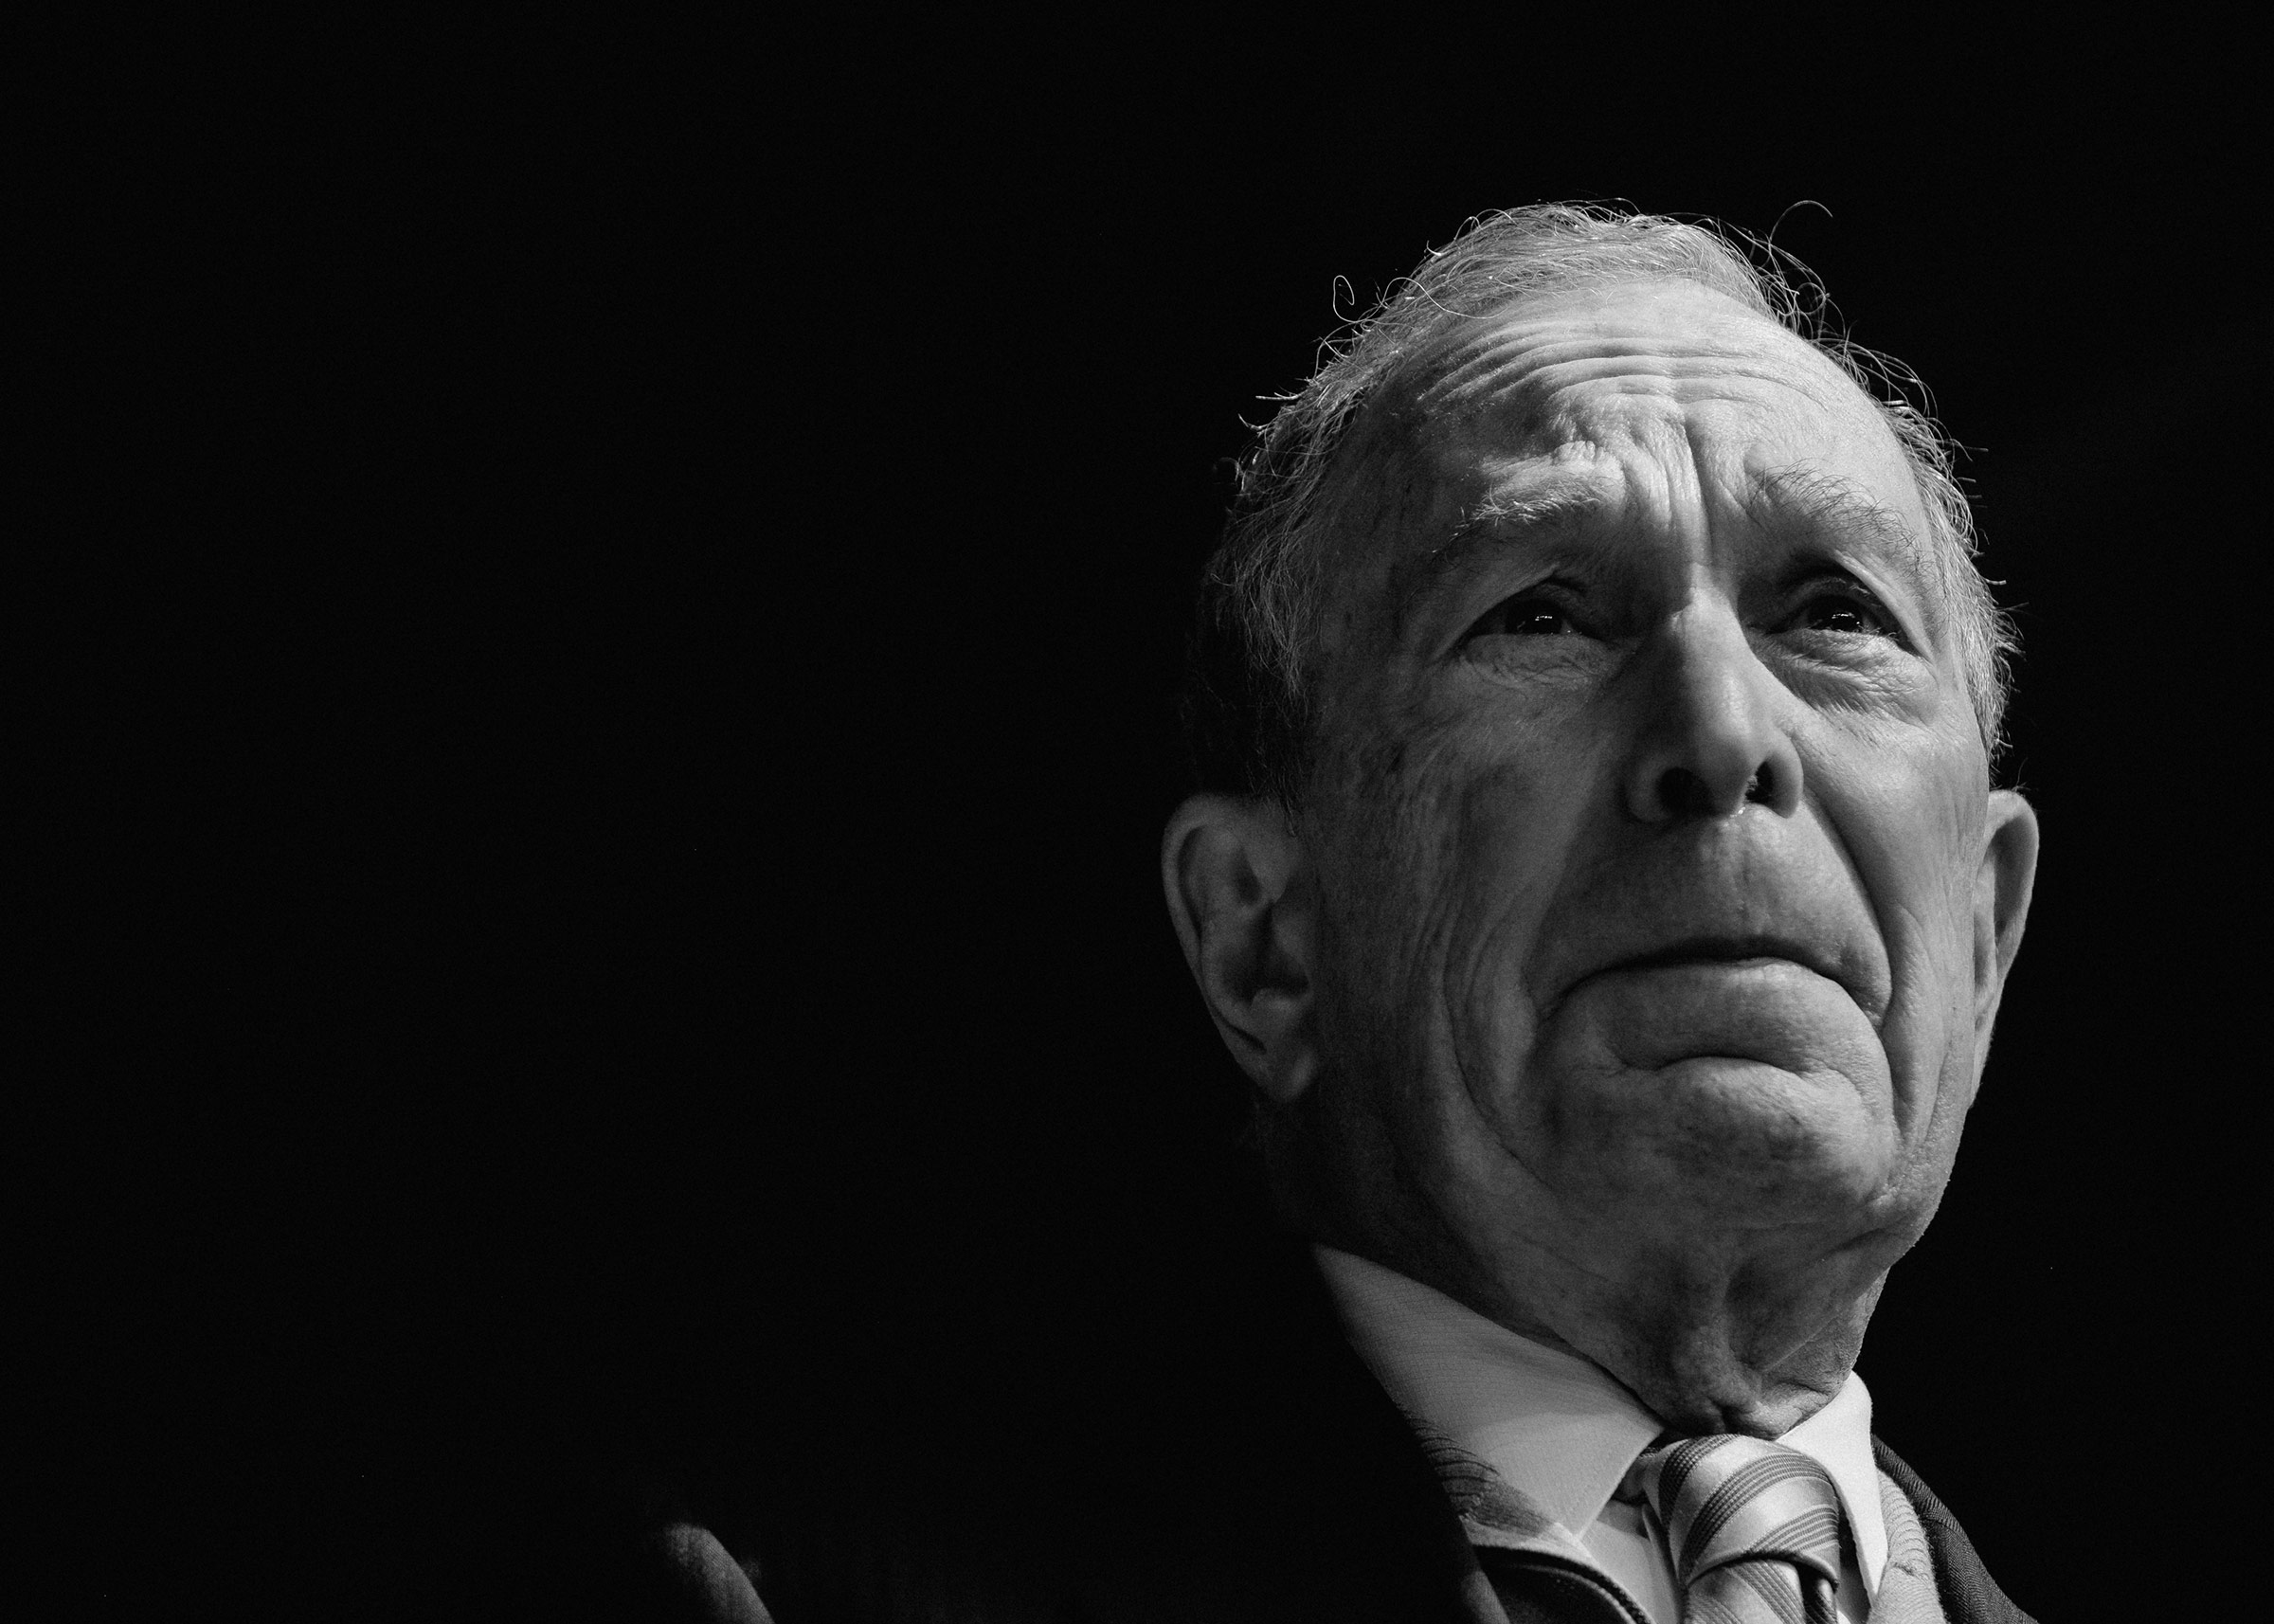 Mike Bloomberg at a rally in downtown Houston, on Feb. 27, 2020. (Christopher Lee for TIME)